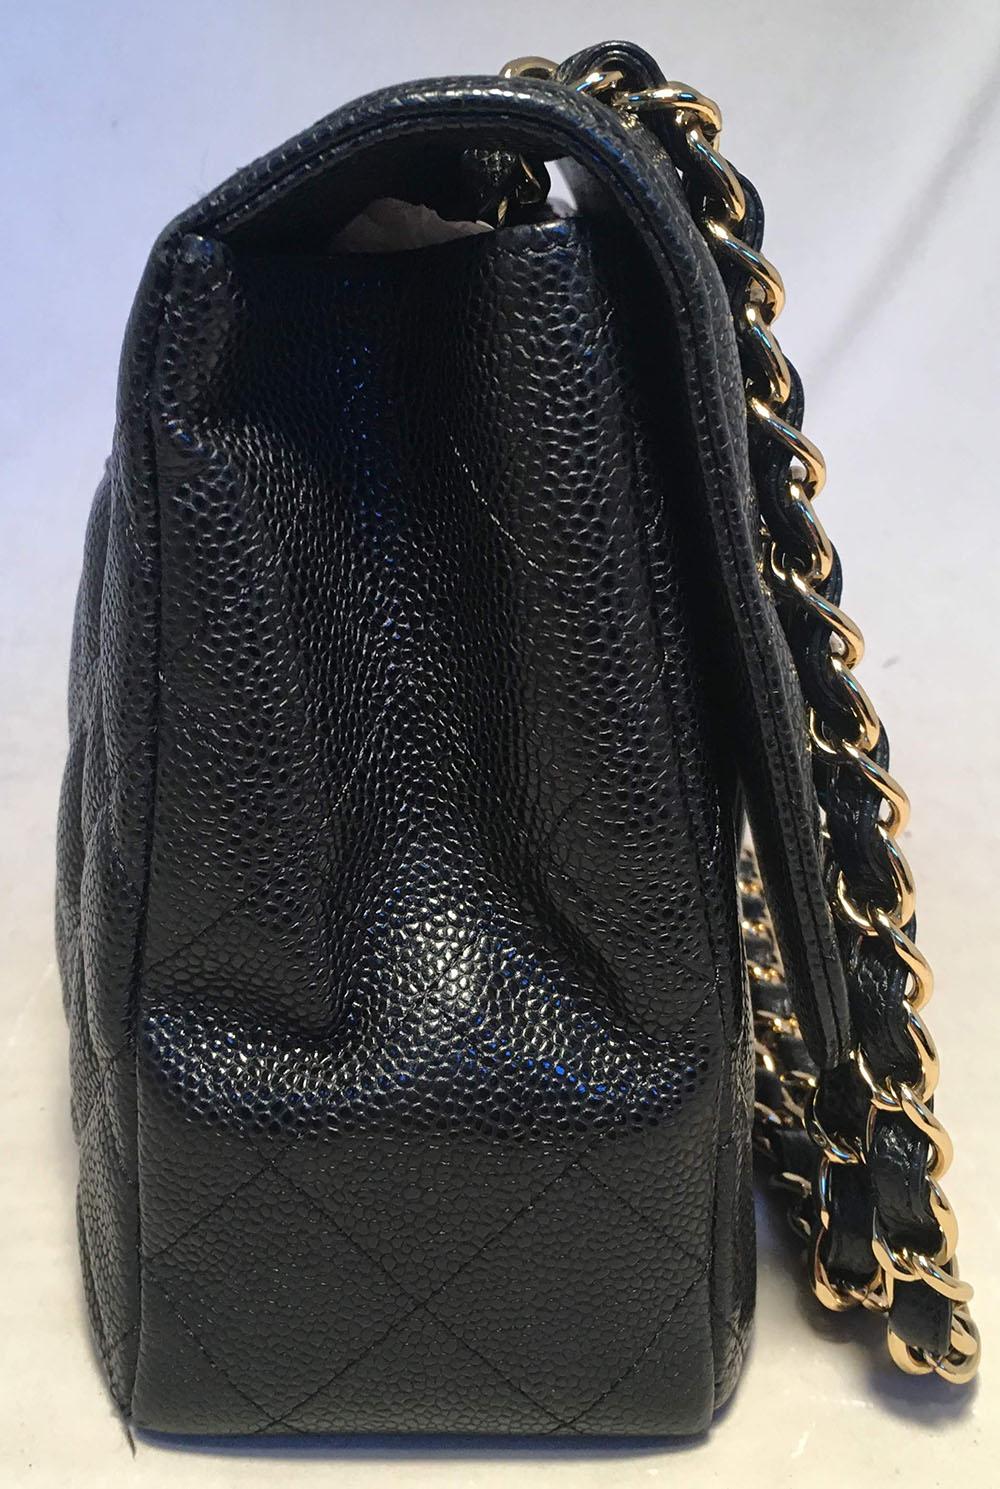 Chanel Black Quilted Caviar Leather Maxi Classic Flap Shoulder Bag in excellent condition. Black quilted caviar leather exterior trimmed with gold hardware. Signature CC logo twist closure opens via single flap to a black leather lined interior that